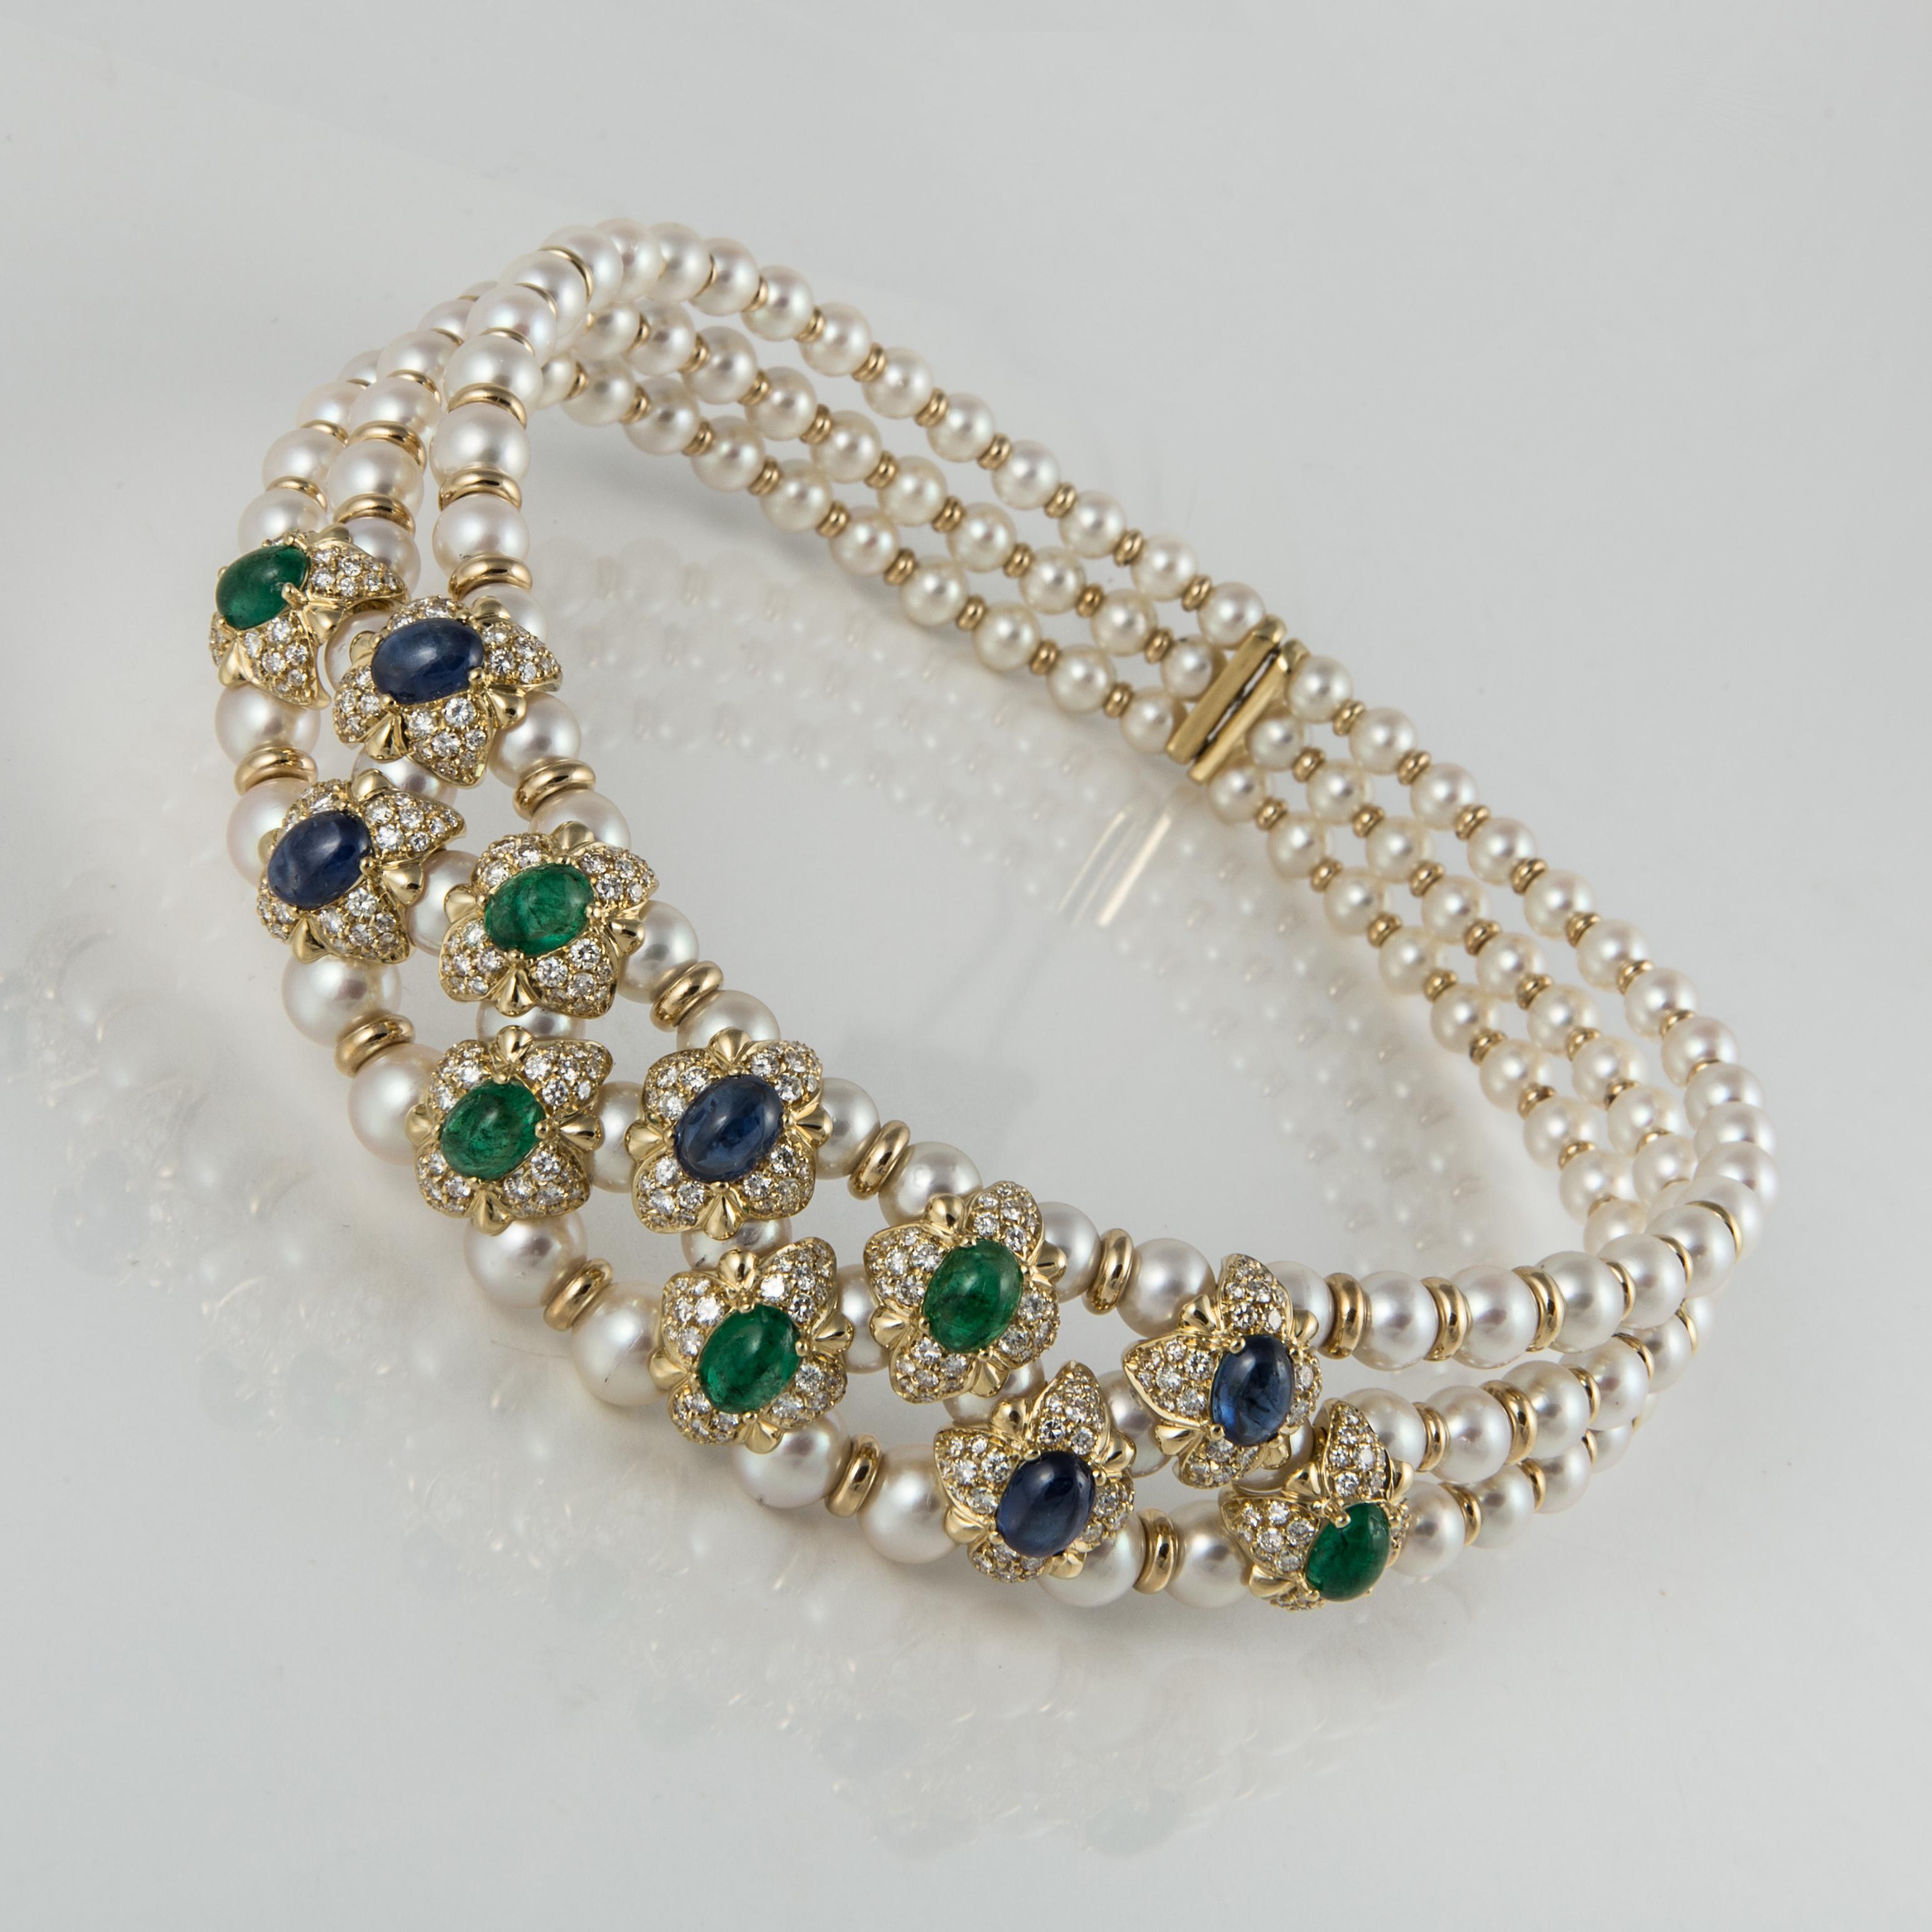 Pearl collar with 132 cultured pearls.  The flower designs contain diamonds, emeralds and sapphires.  There are six cabochon emeralds weighing 12.0 carats.  The six sapphire cabochons total 13.5 carats.  Total of 308 round diamonds weighing 8.0